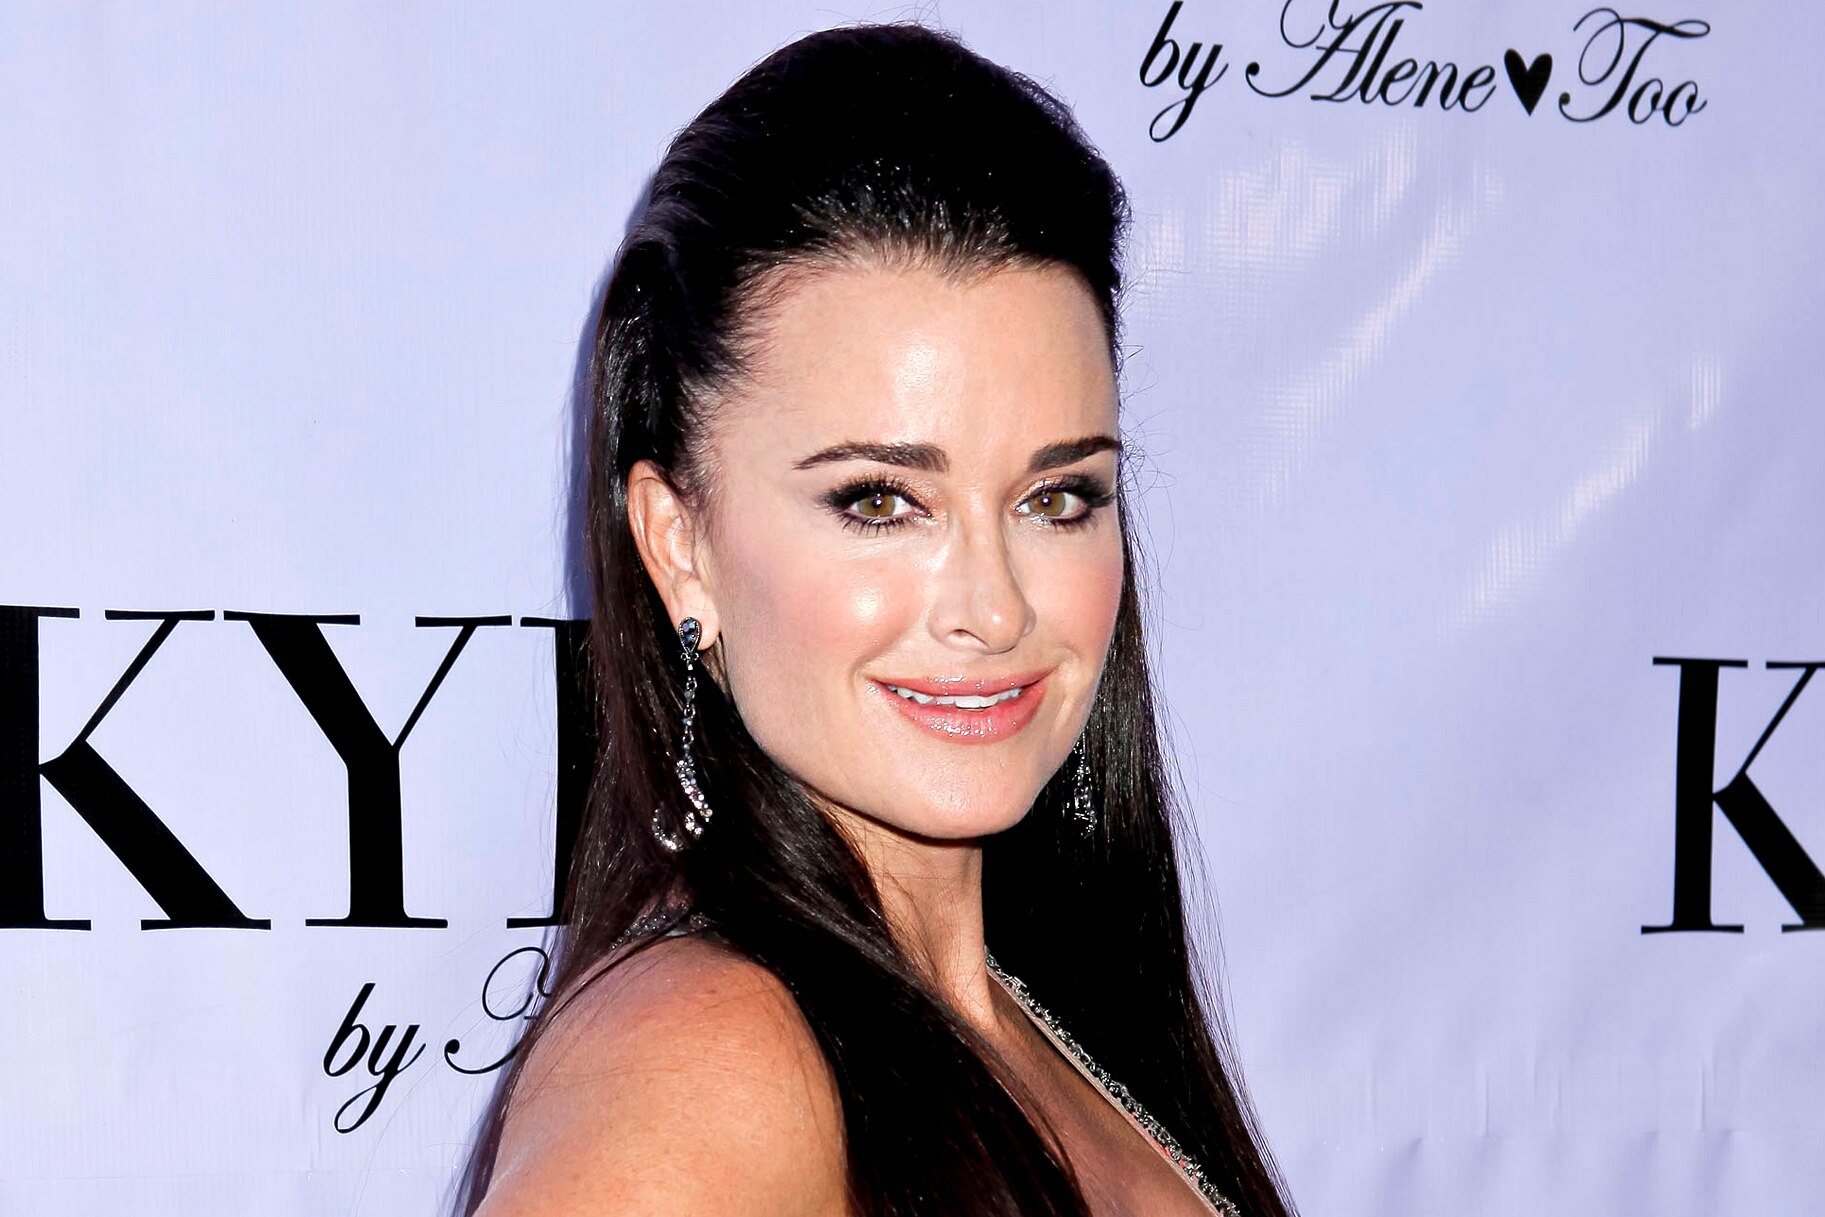 Kyle Richards is known for her flowing locks